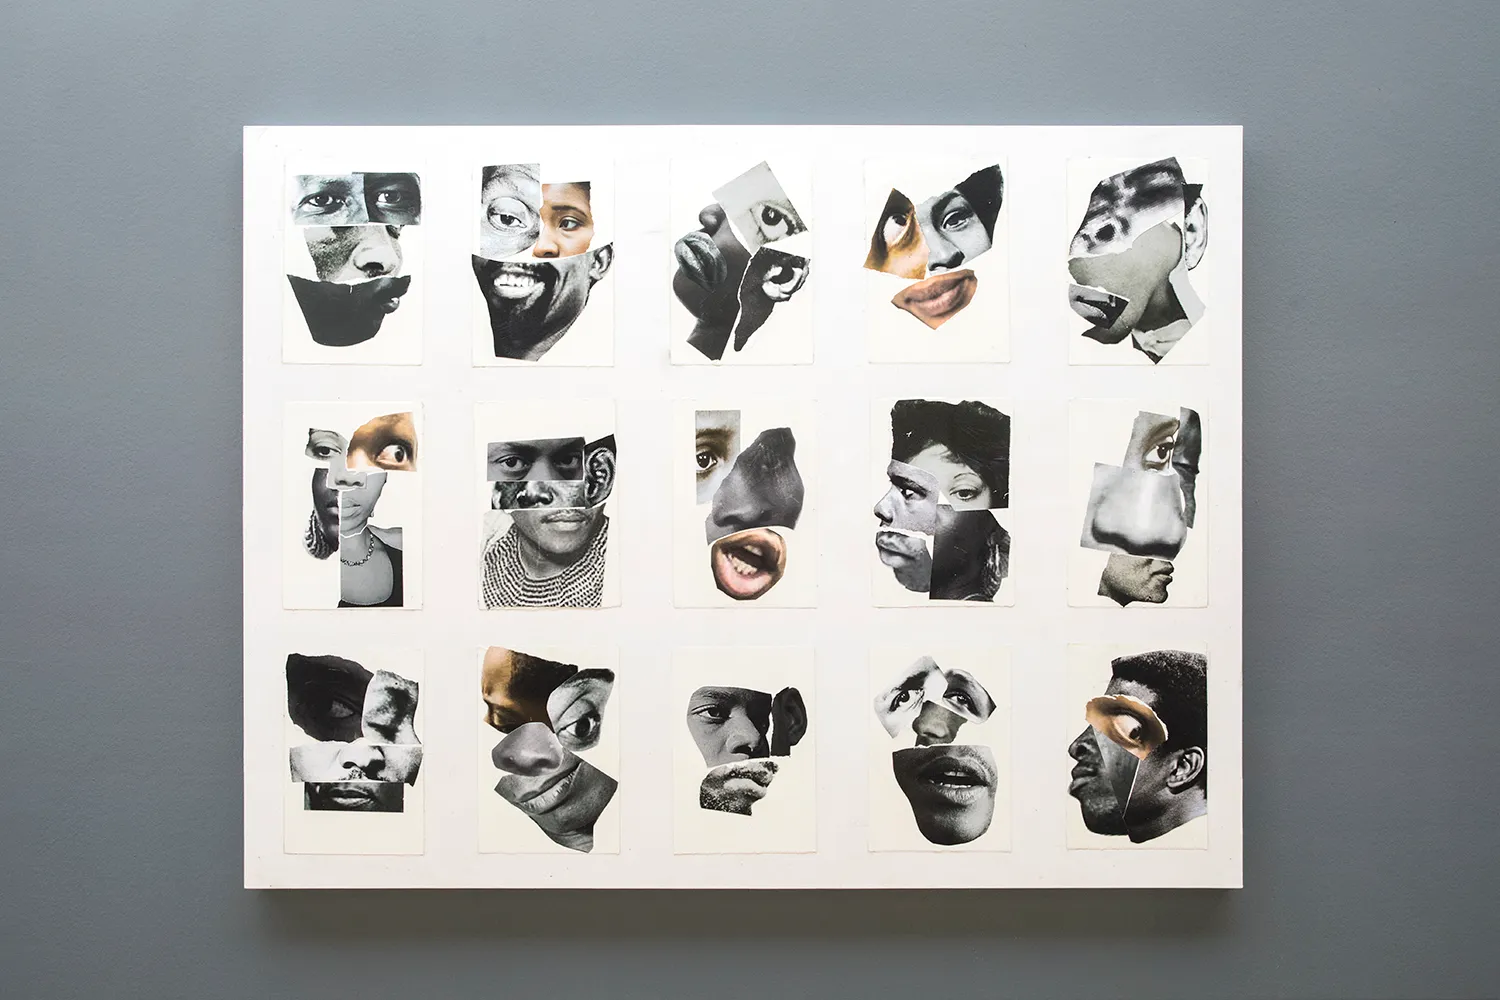 Collages of faces with different parts (eyes, ears, mouth etc), forming a total of 15 black and white portraits, applied on a canvas